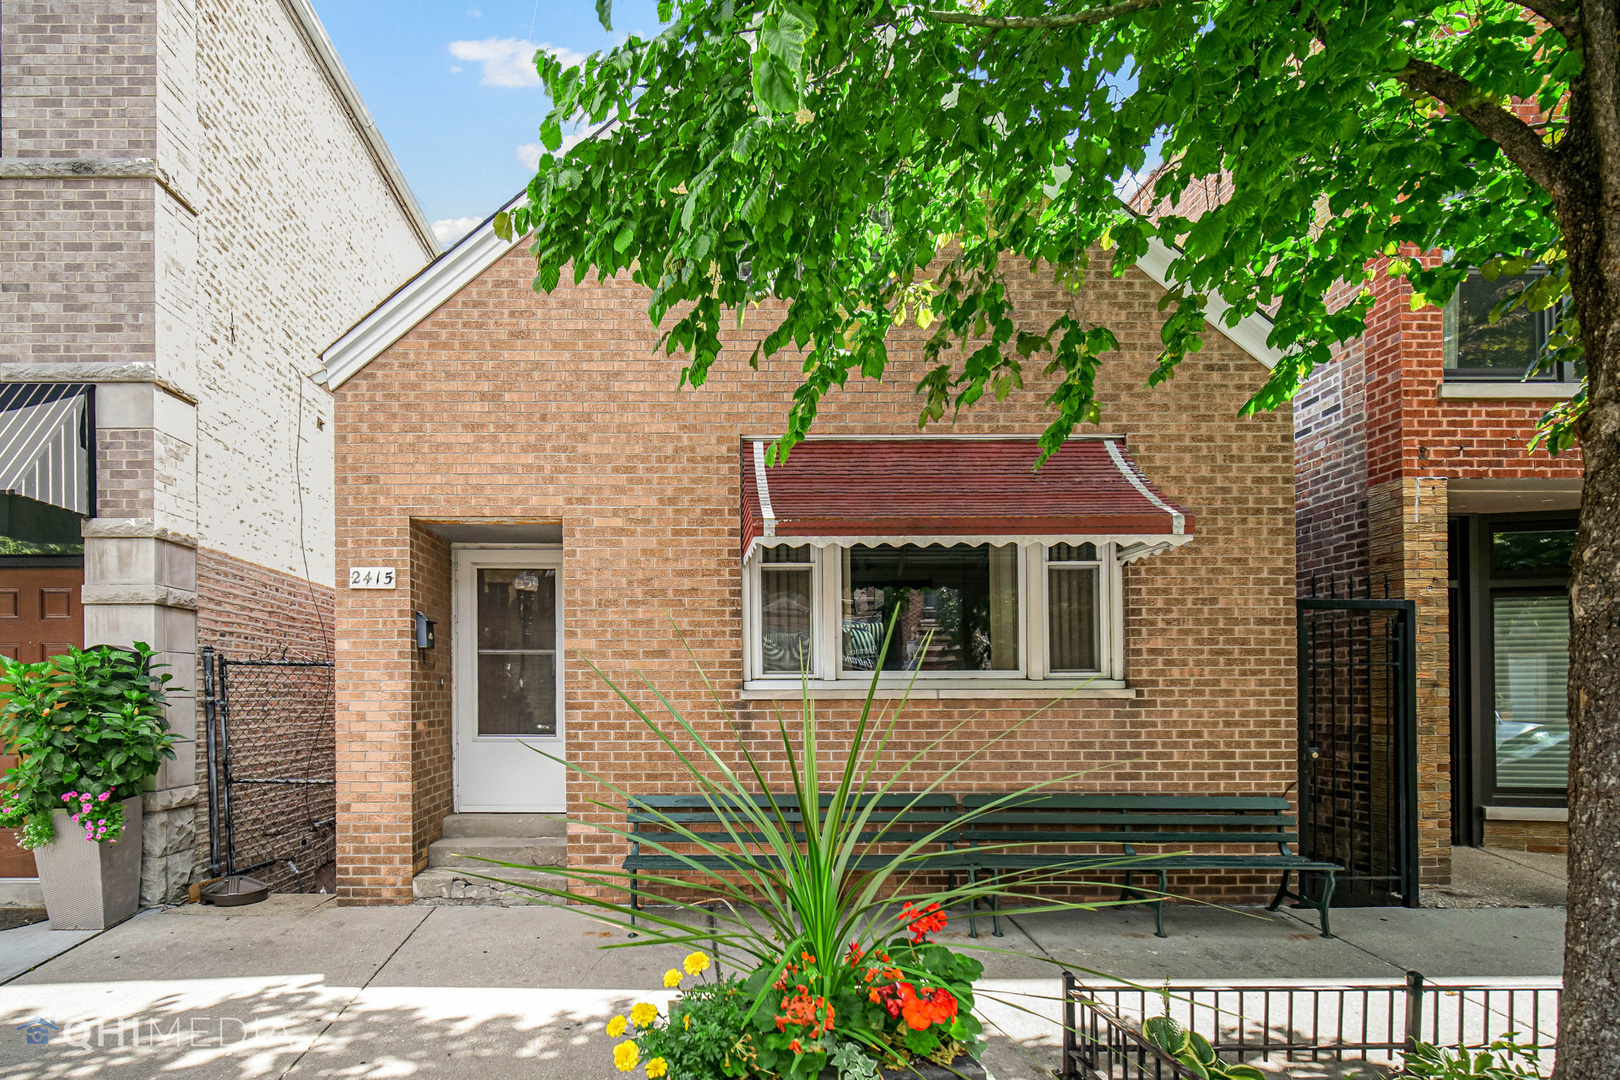 2415 S Oakley Ave, Chicago, IL 60608 - MLS 11735478 - Coldwell Banker